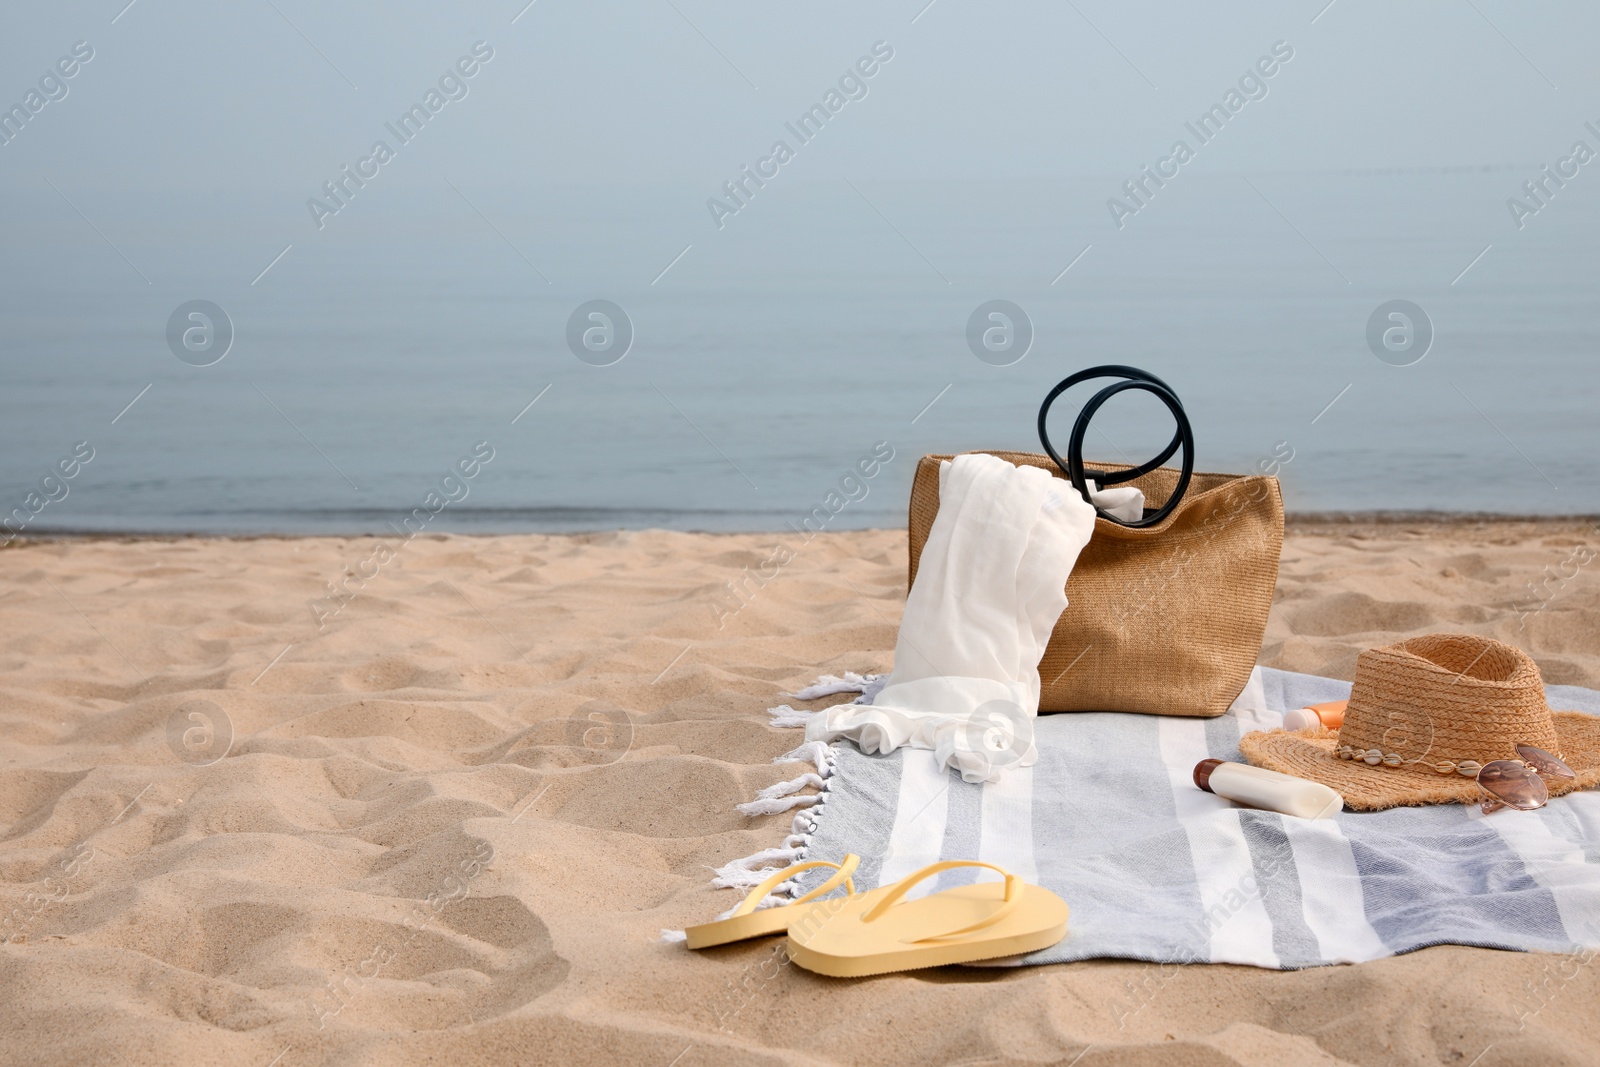 Photo of Bag and other beach items on sandy seashore, space for text